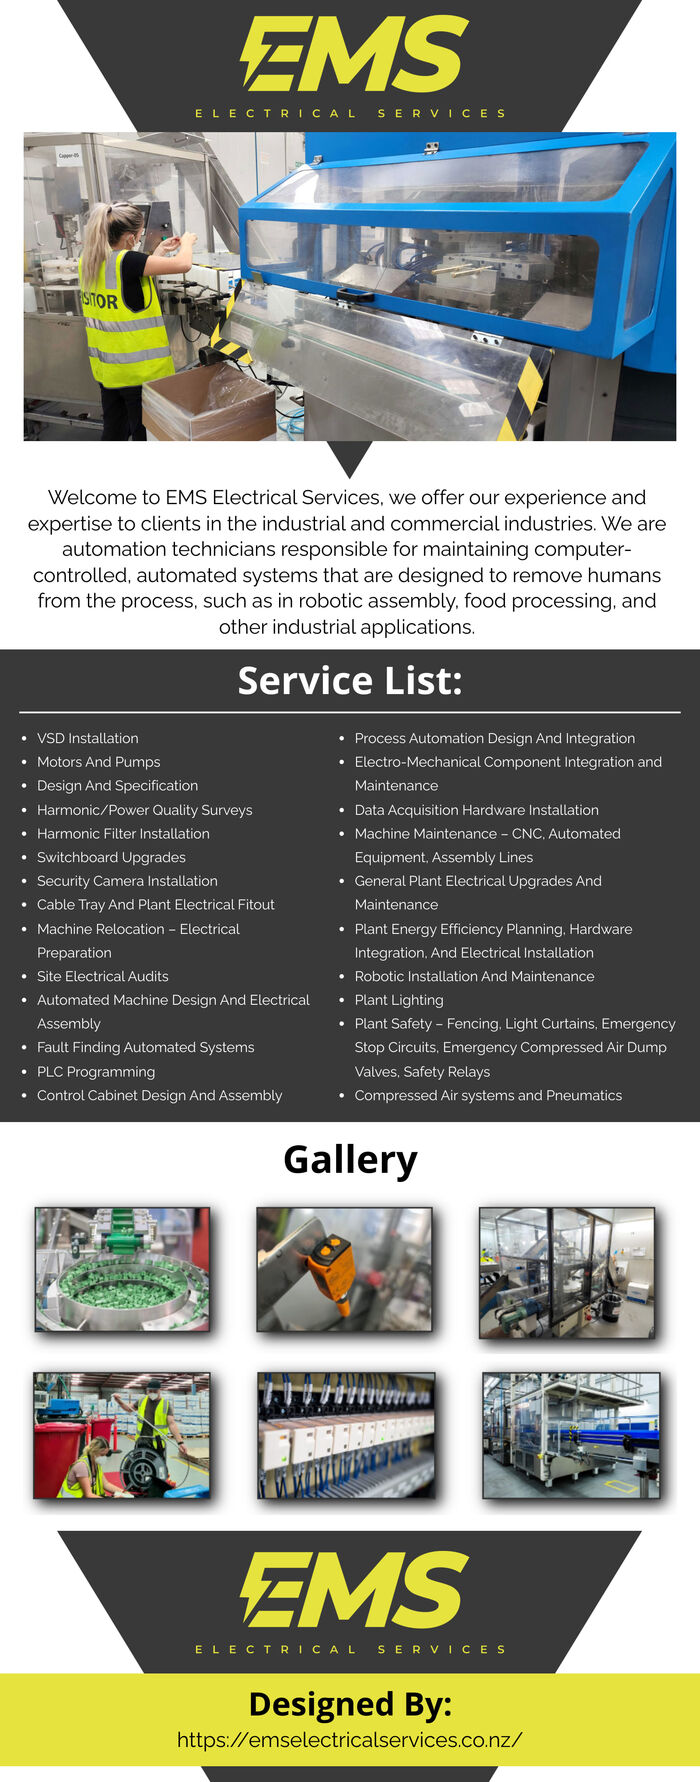 This Infographic is designed by EMS Electrical Services